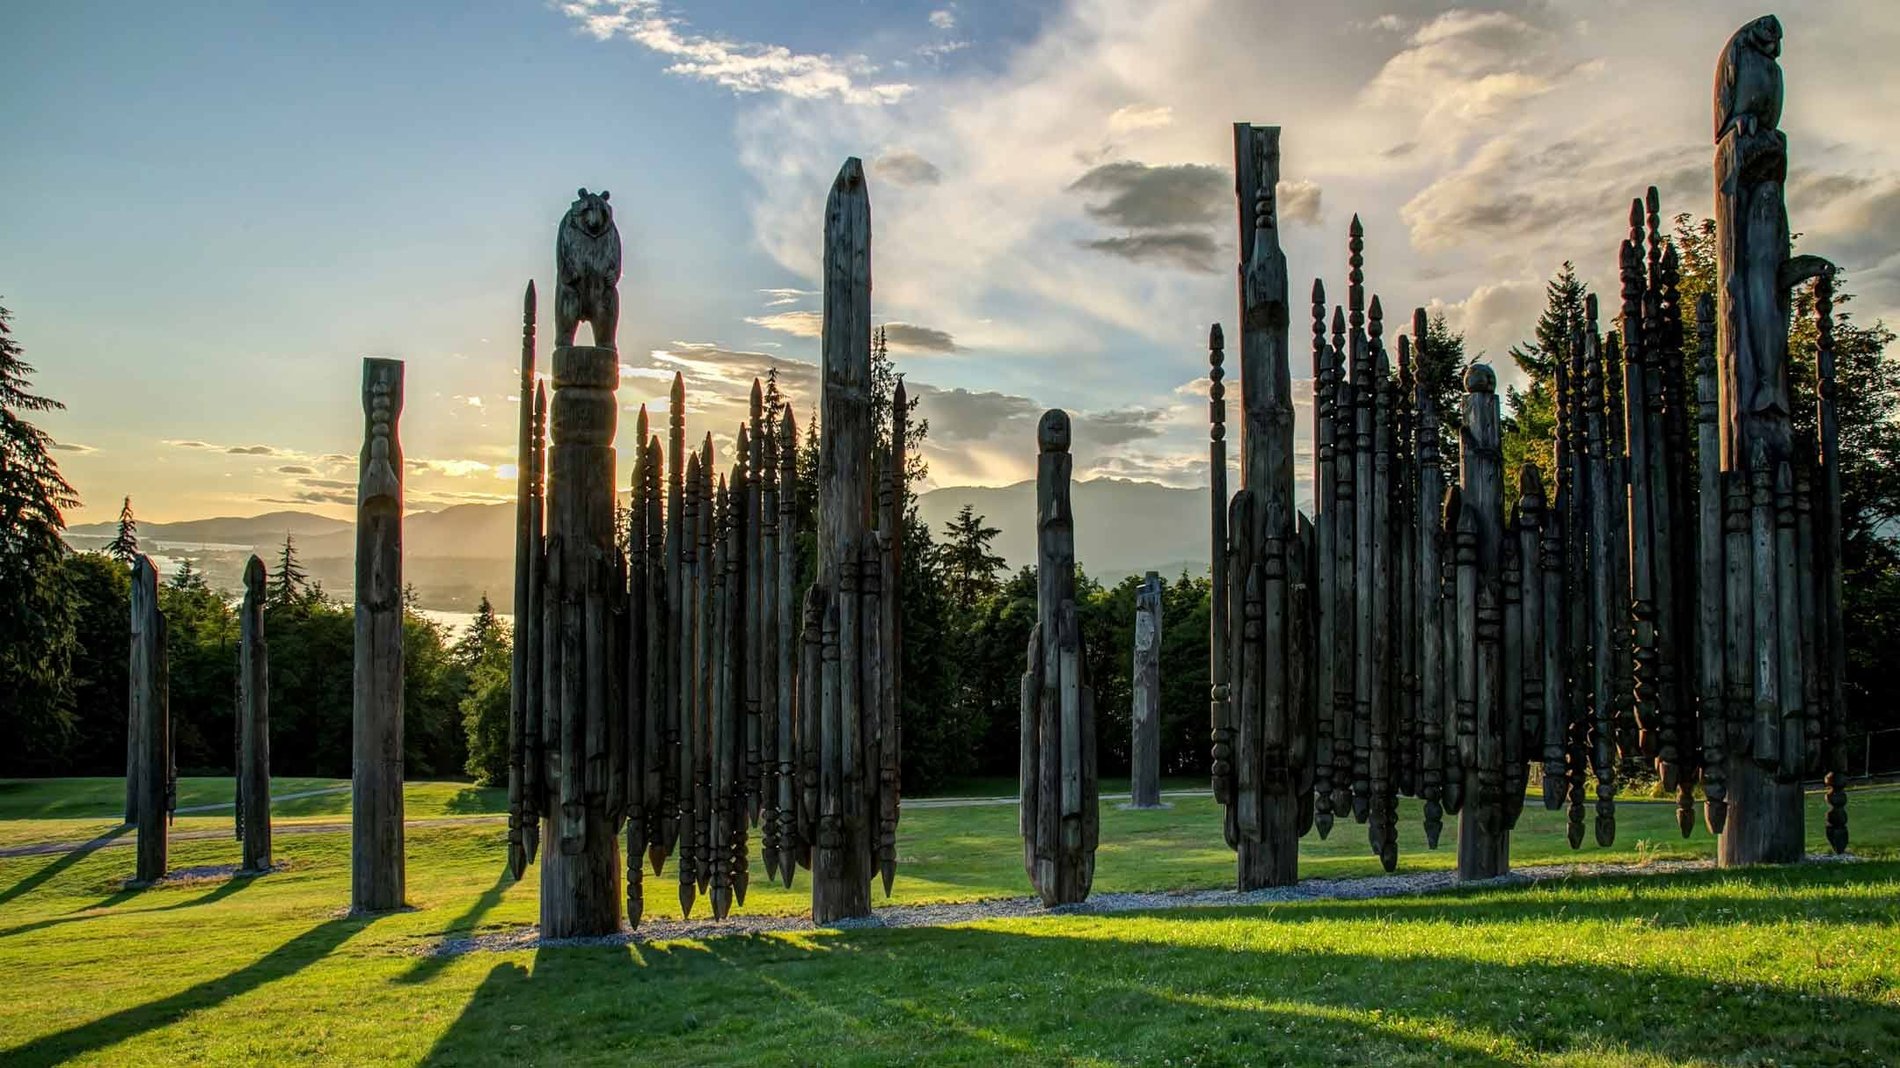 "Playground of the Gods" on Burnaby Mountain at sunset